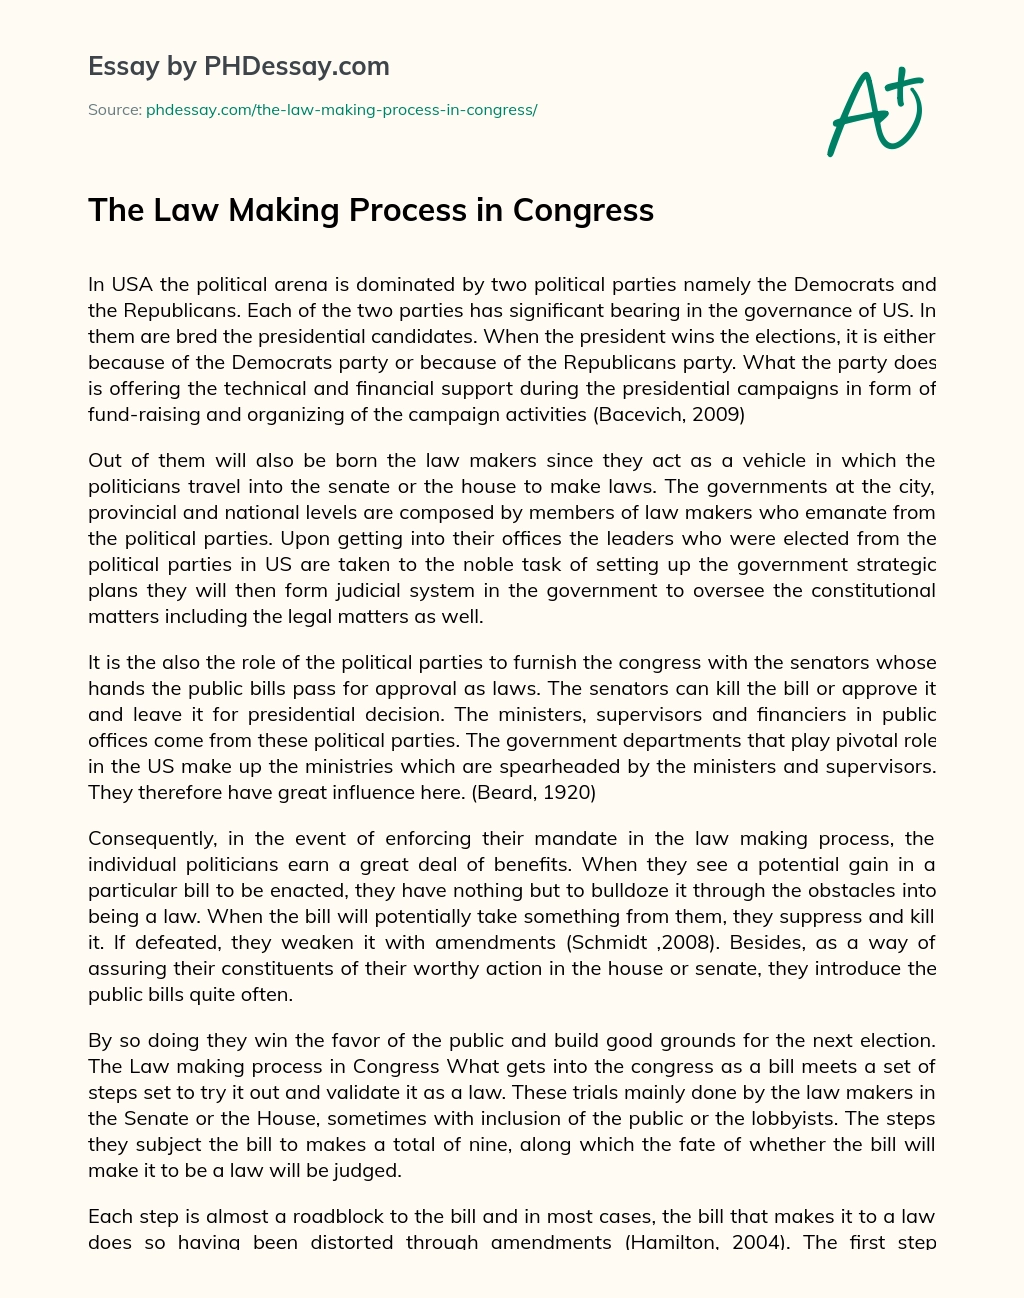 The Law Making Process in Congress essay